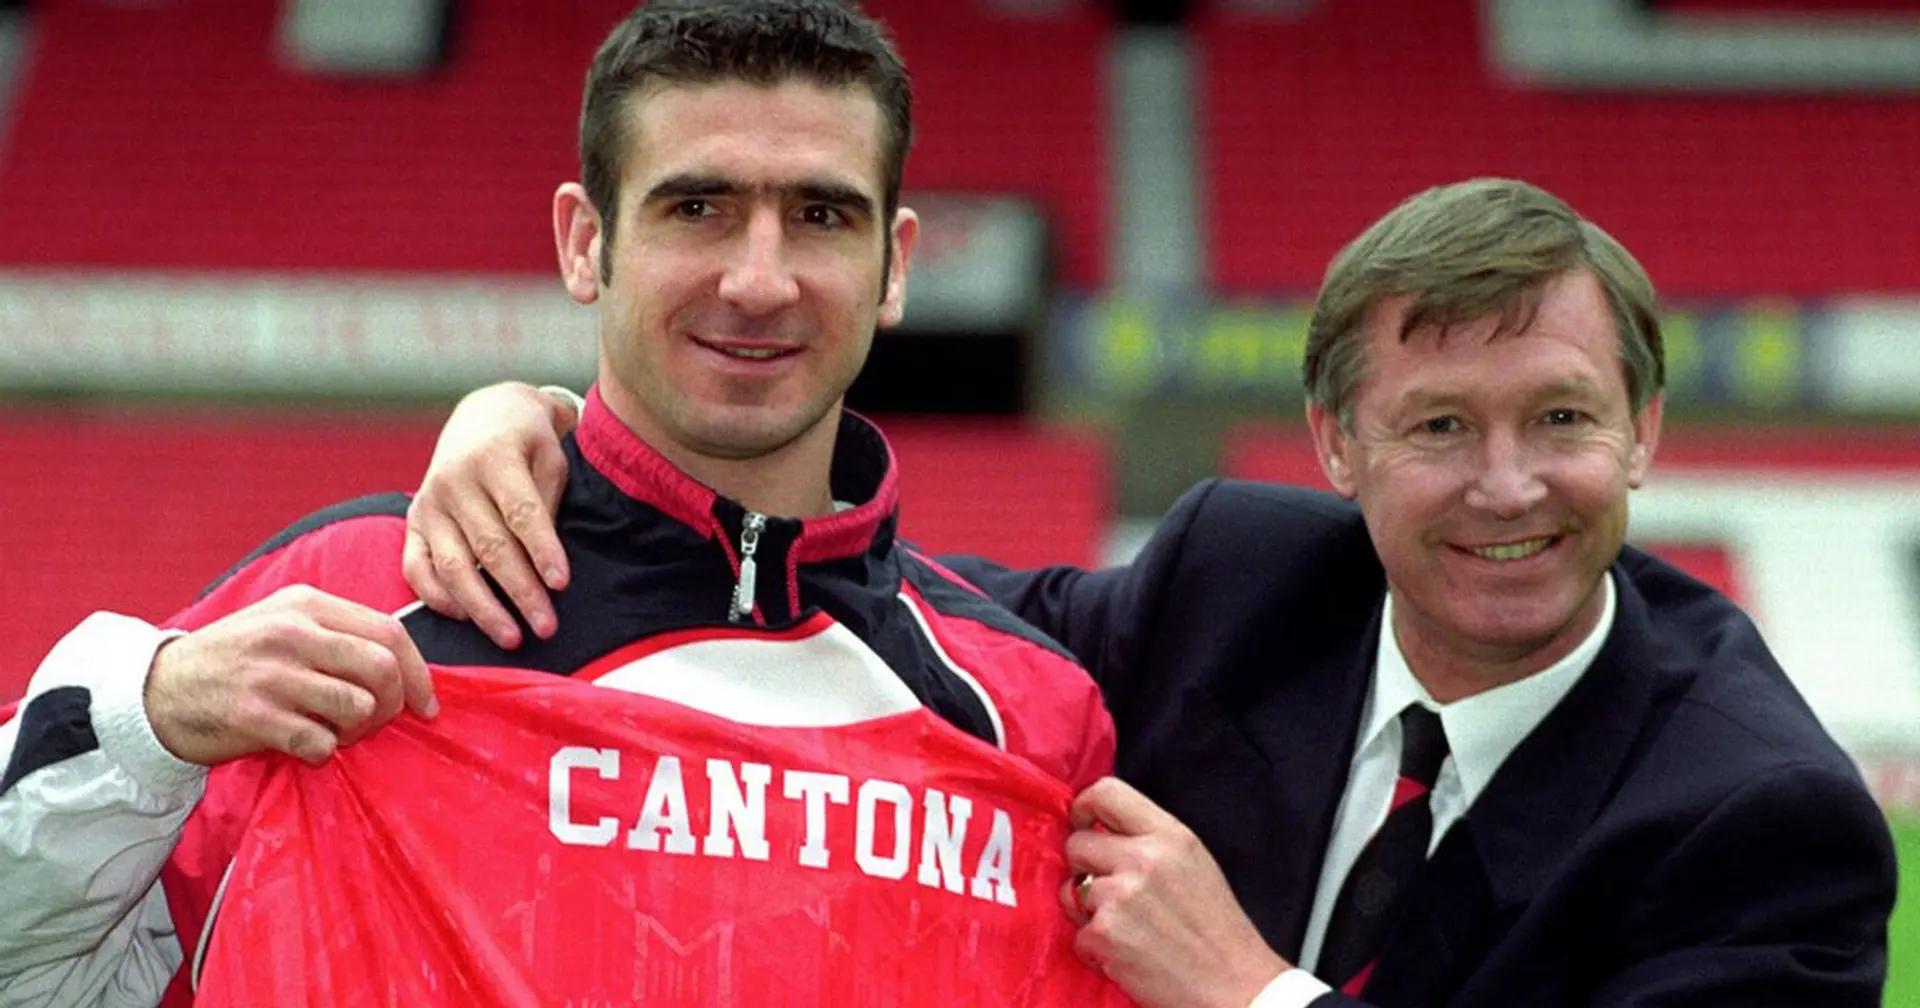 Sir Alex Ferguson was convinced to sign Eric Cantona after showering with Man United players